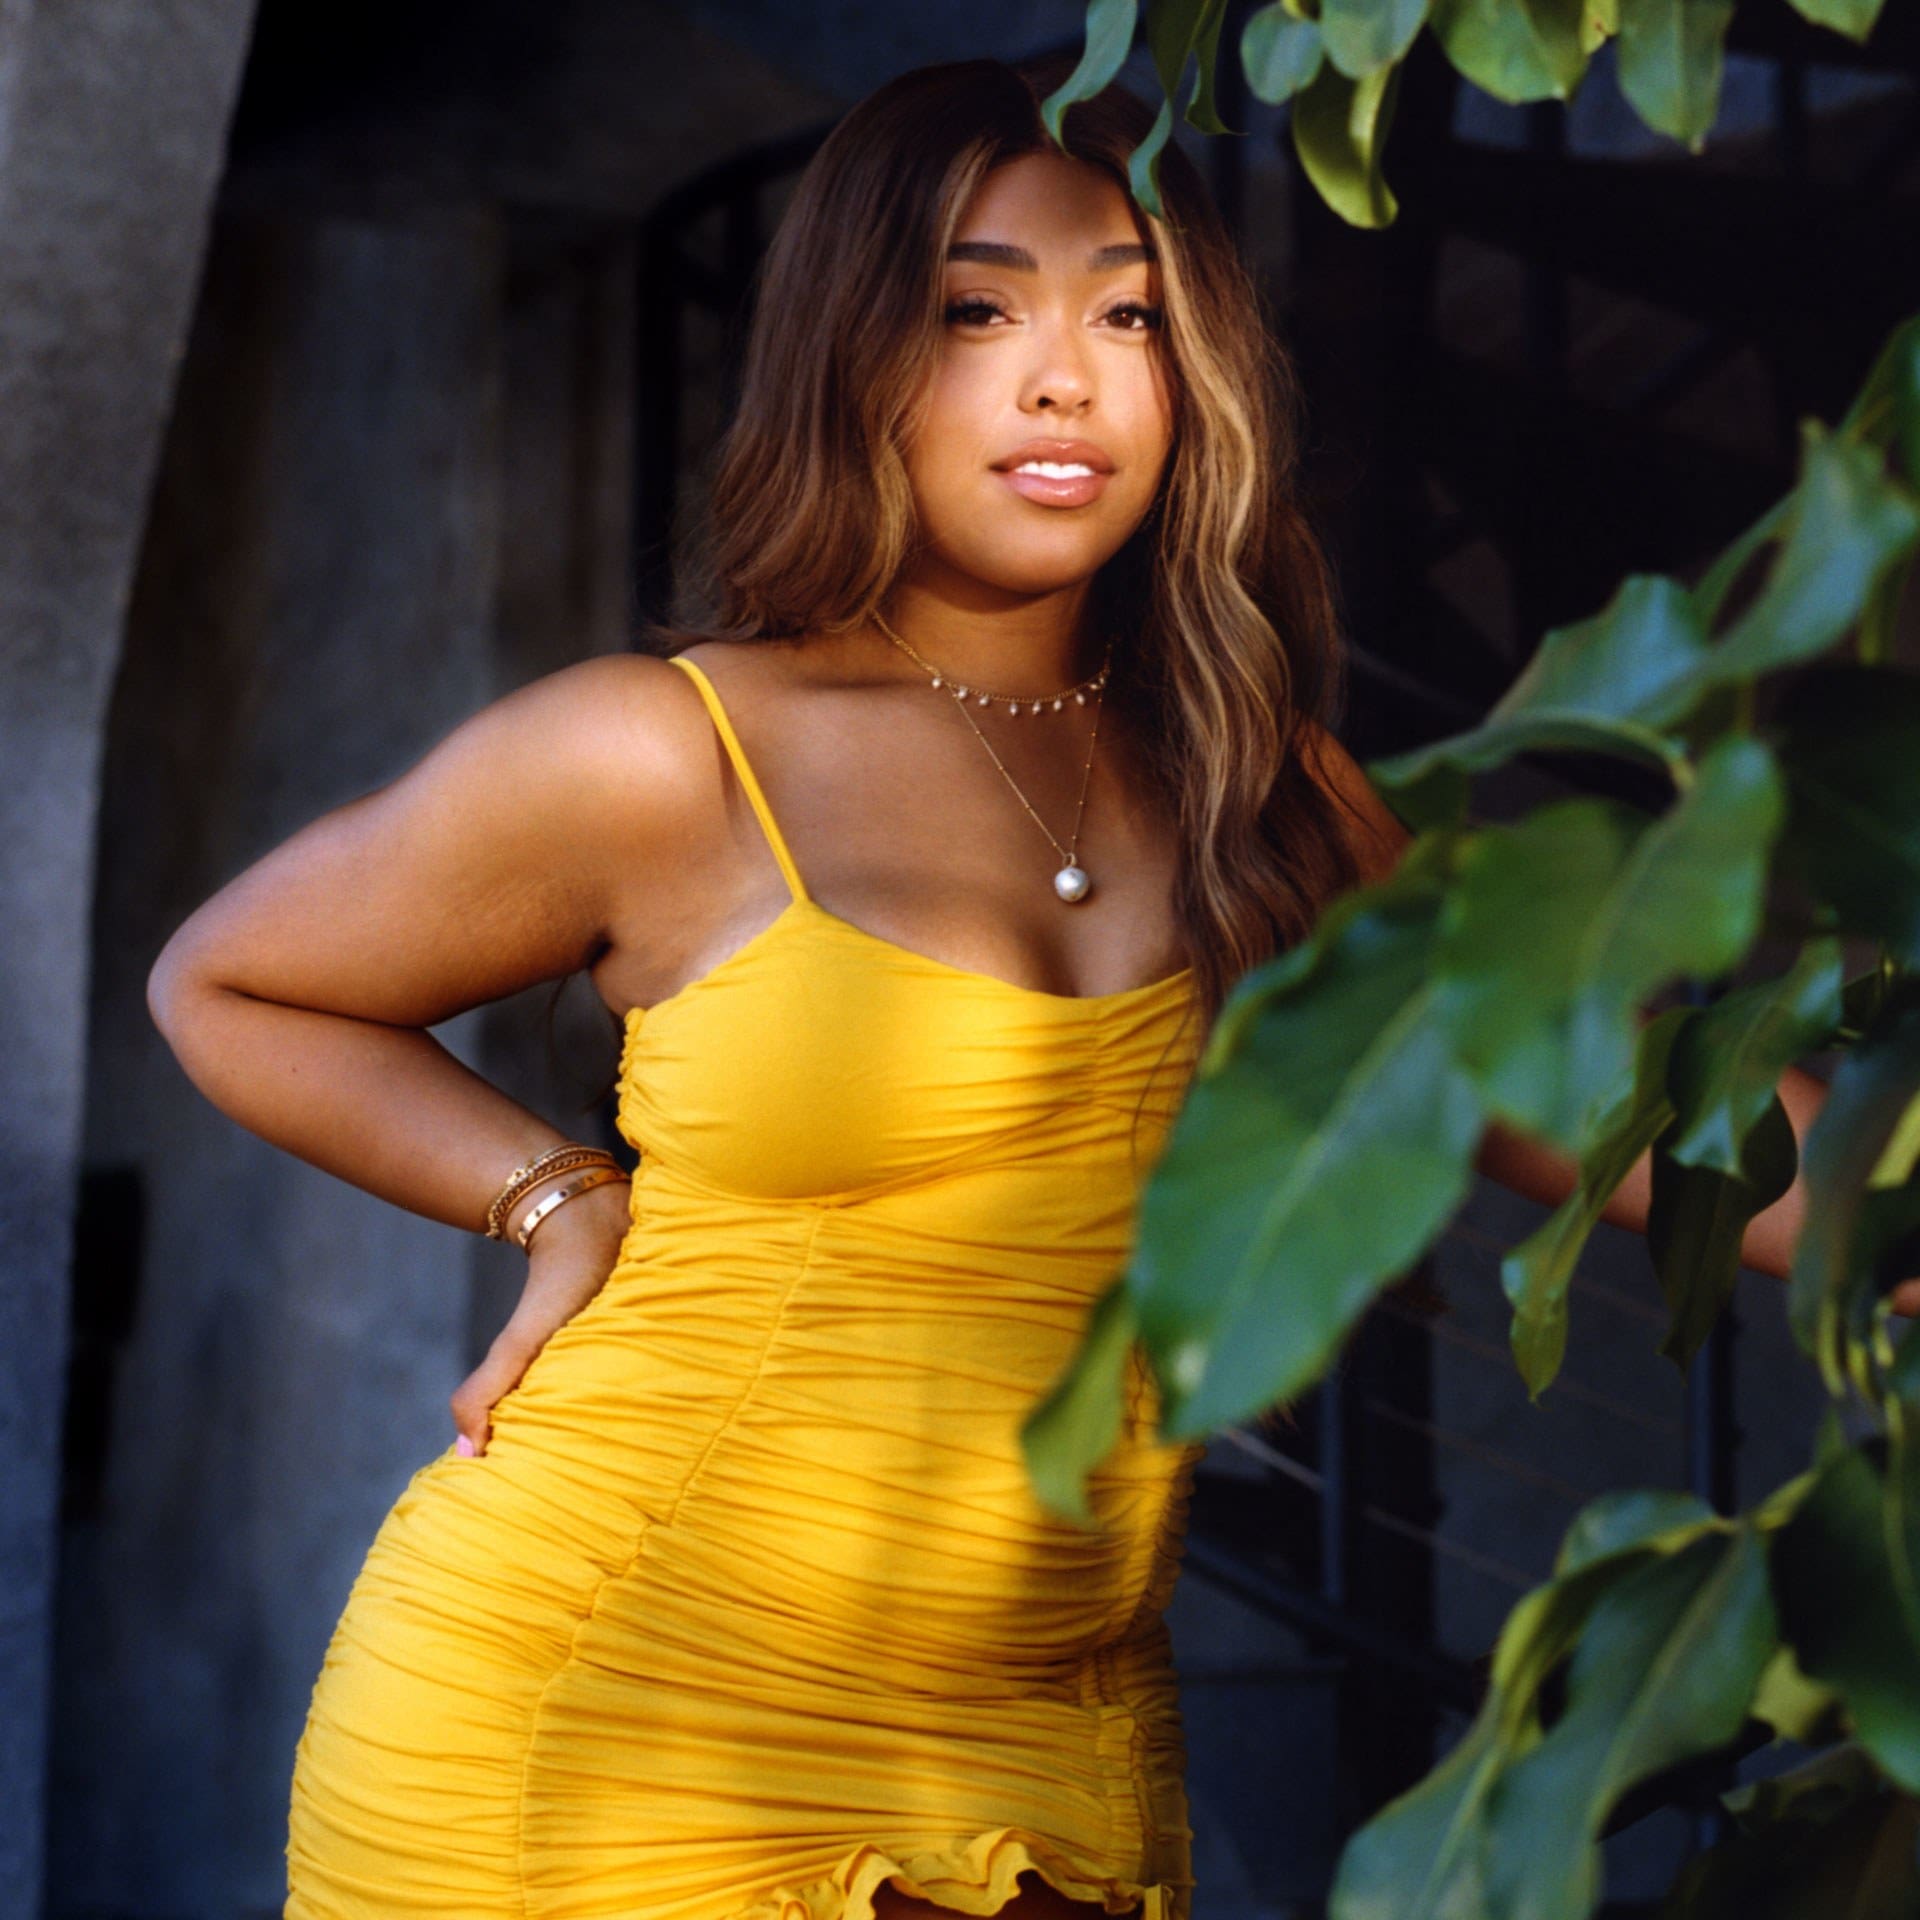 Jordyn Woods Shows Off Her Jaw-Dropping Curves On Social Media